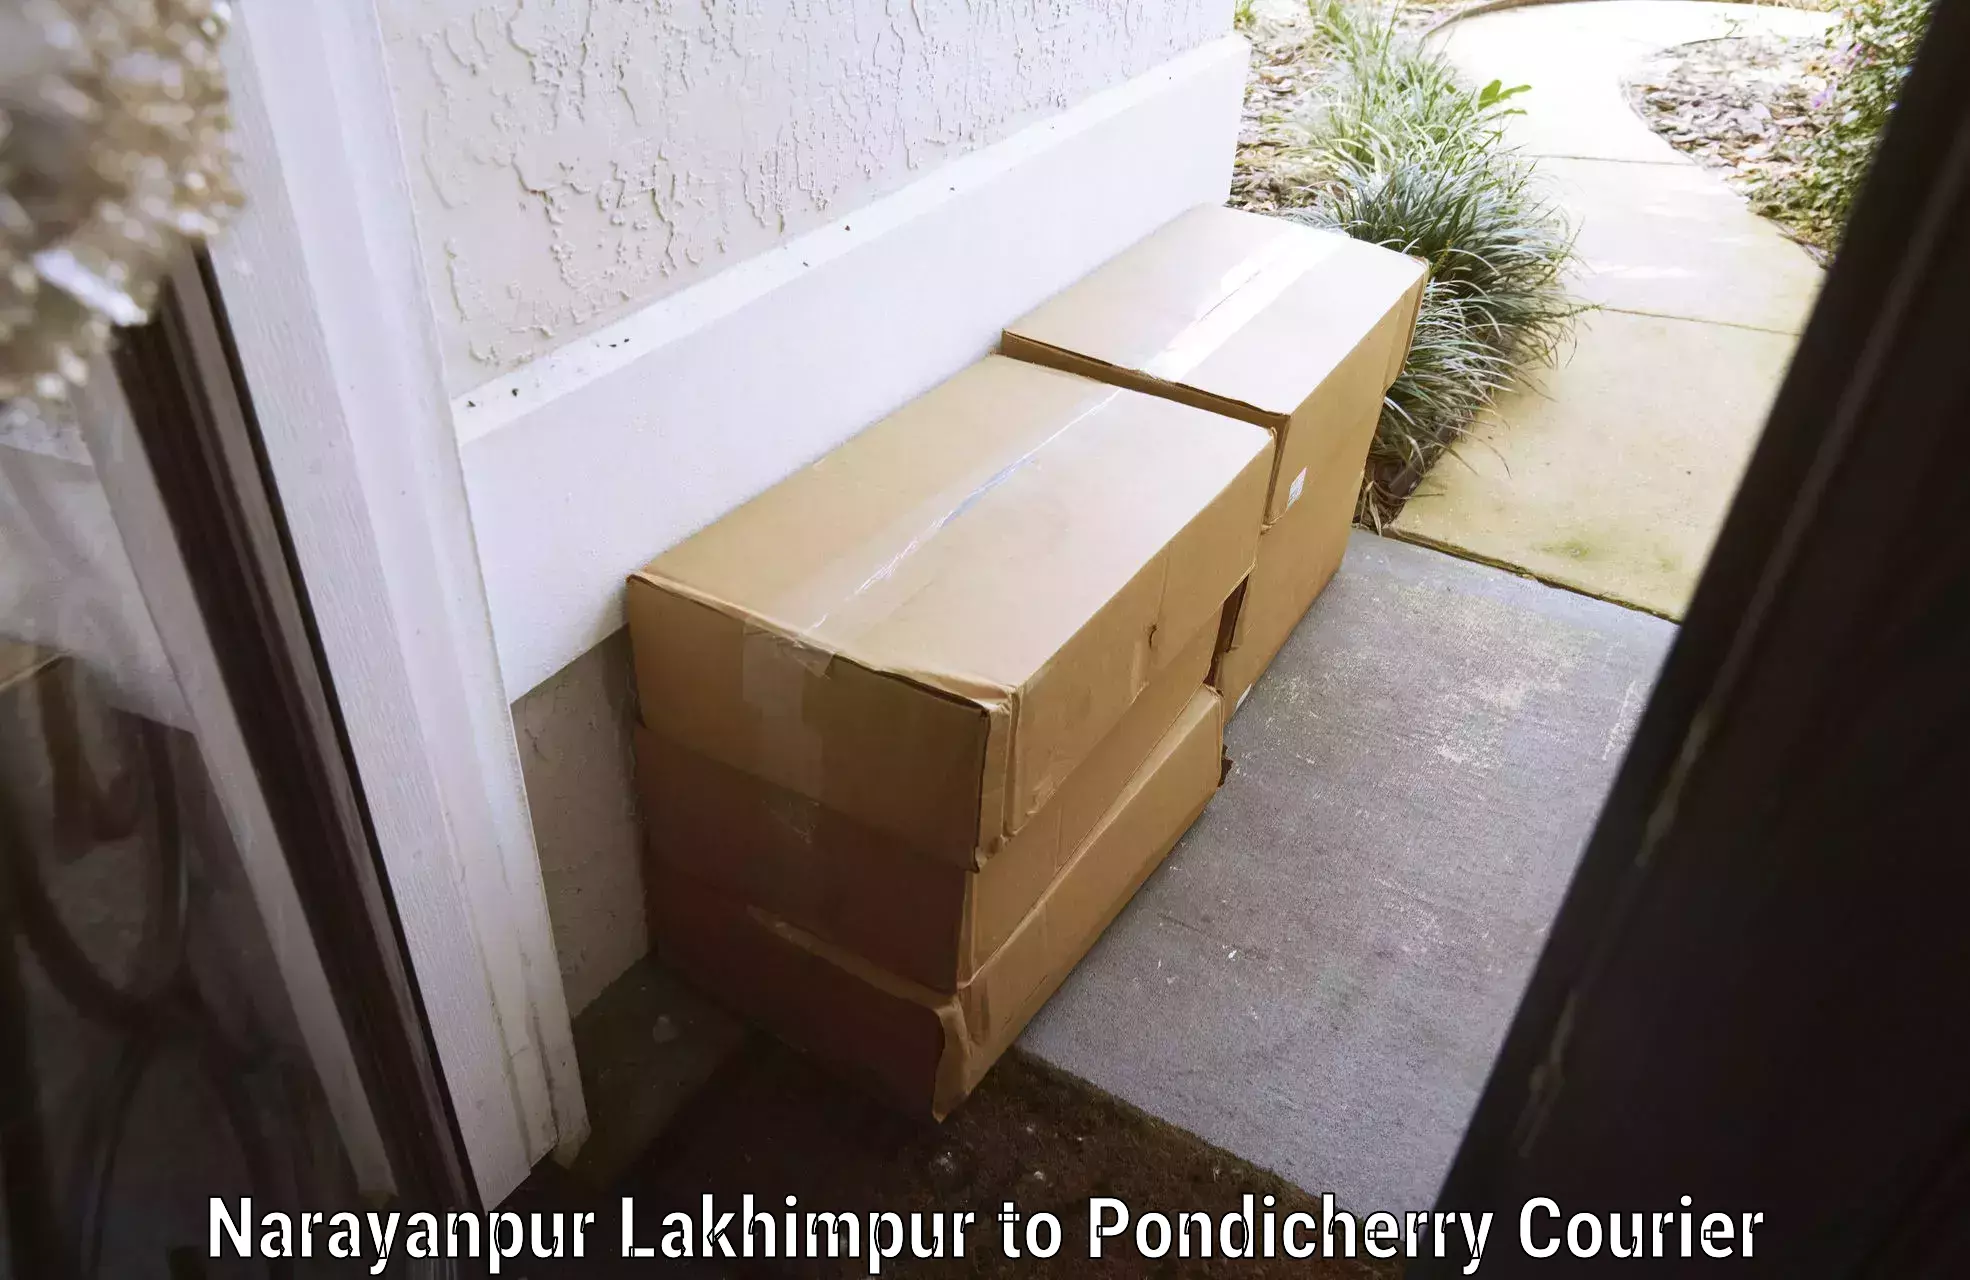 Luggage delivery logistics Narayanpur Lakhimpur to Pondicherry